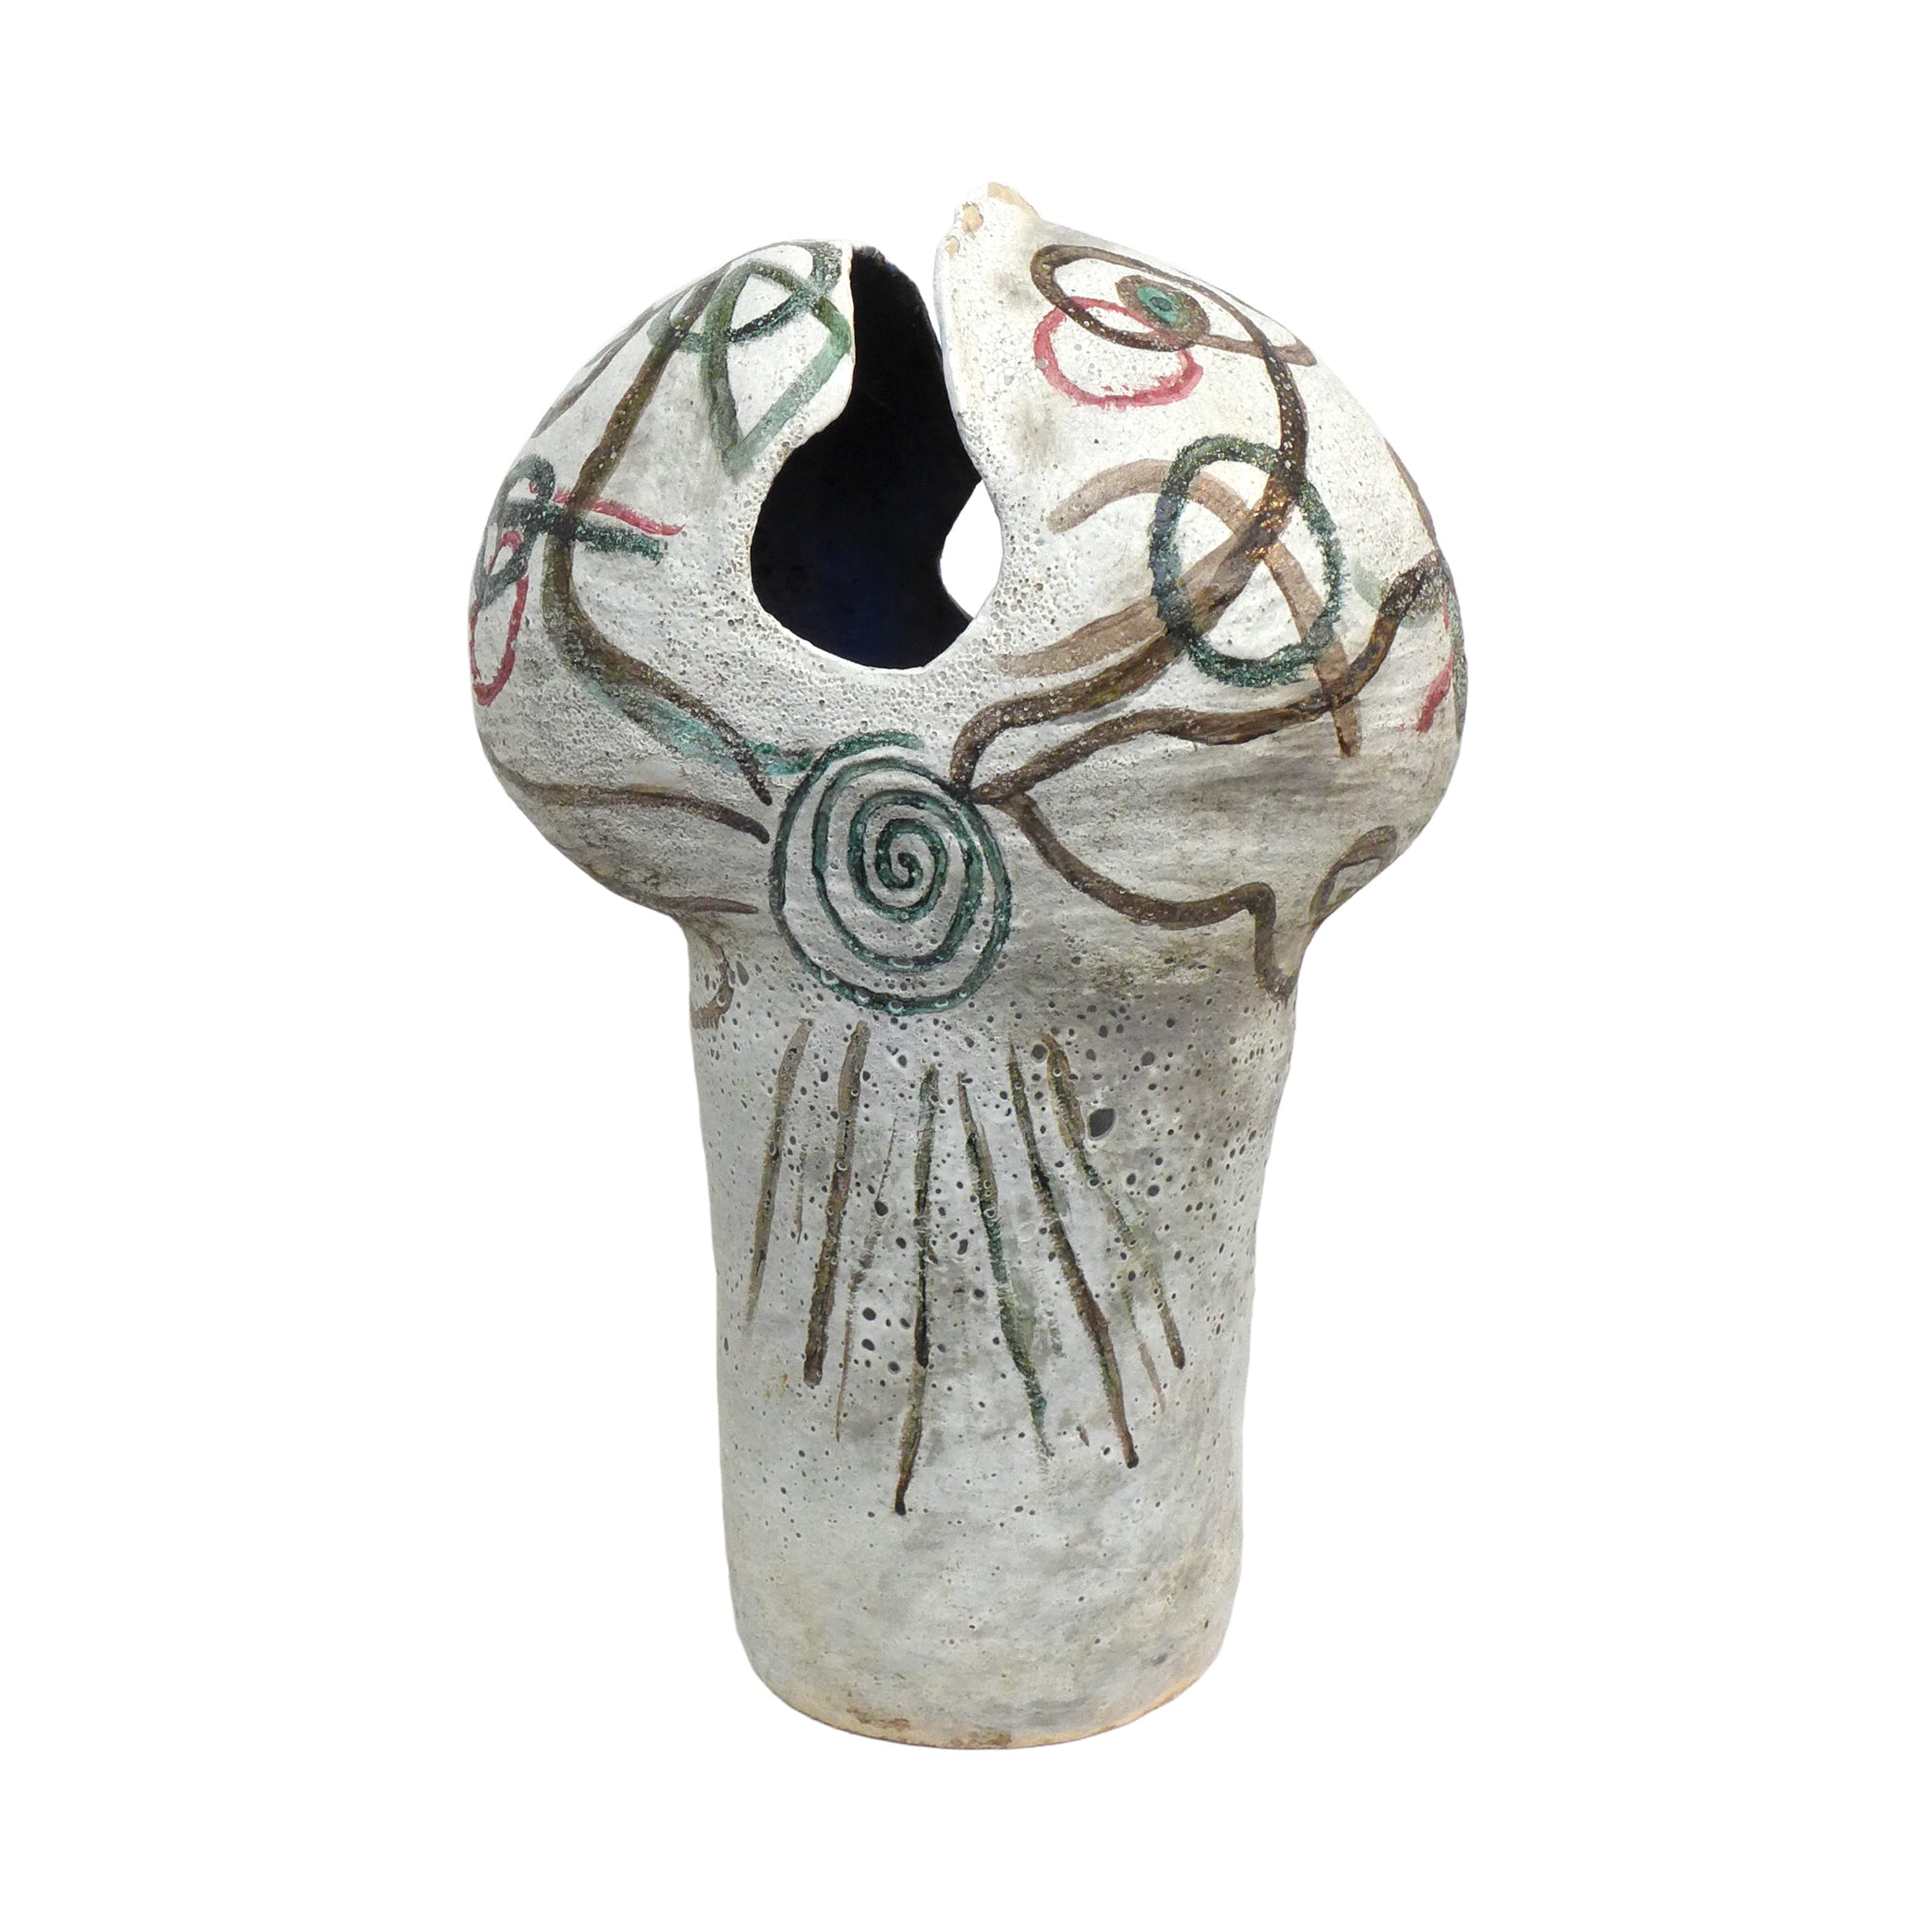 Large Ceramic Vase with Abstract Decoration by Valerie Bloom